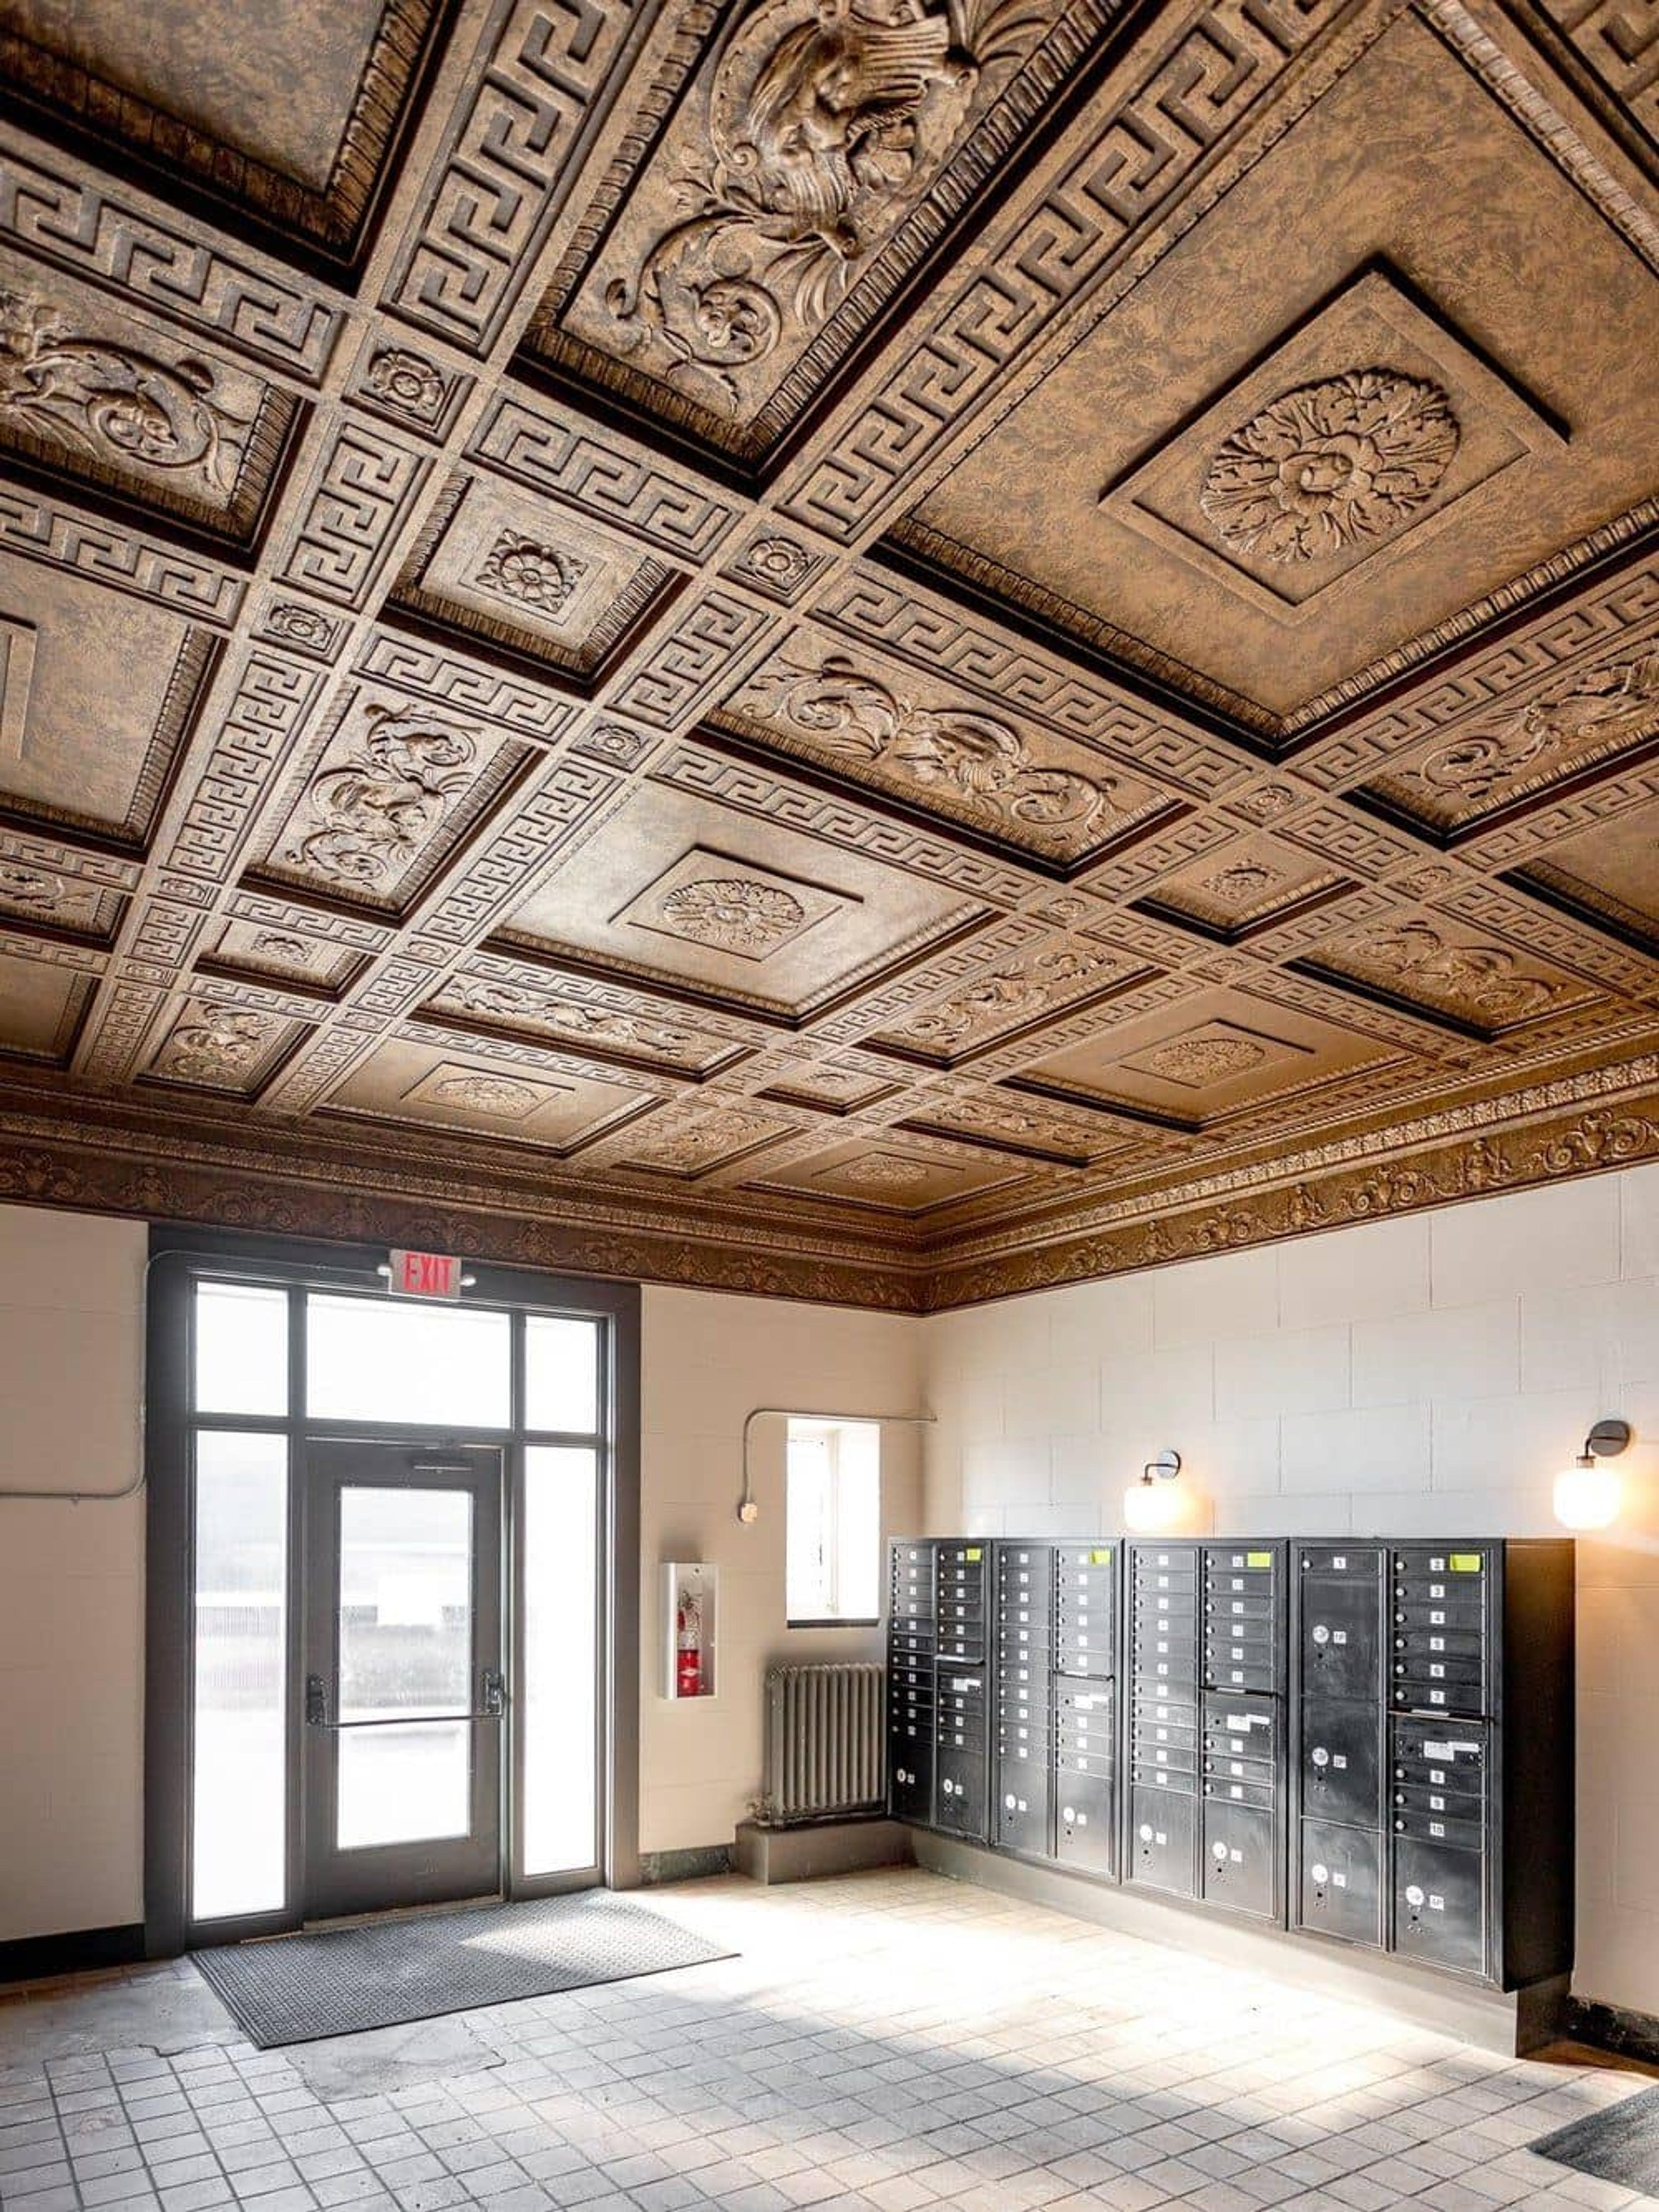 HEATHER HALL LOBBY, BUILT IN 1920S AND RENOVATED BY GREATWATER, PHOTO COURTESY OF GREATWATER OPPORTUNITY CAPITAL.